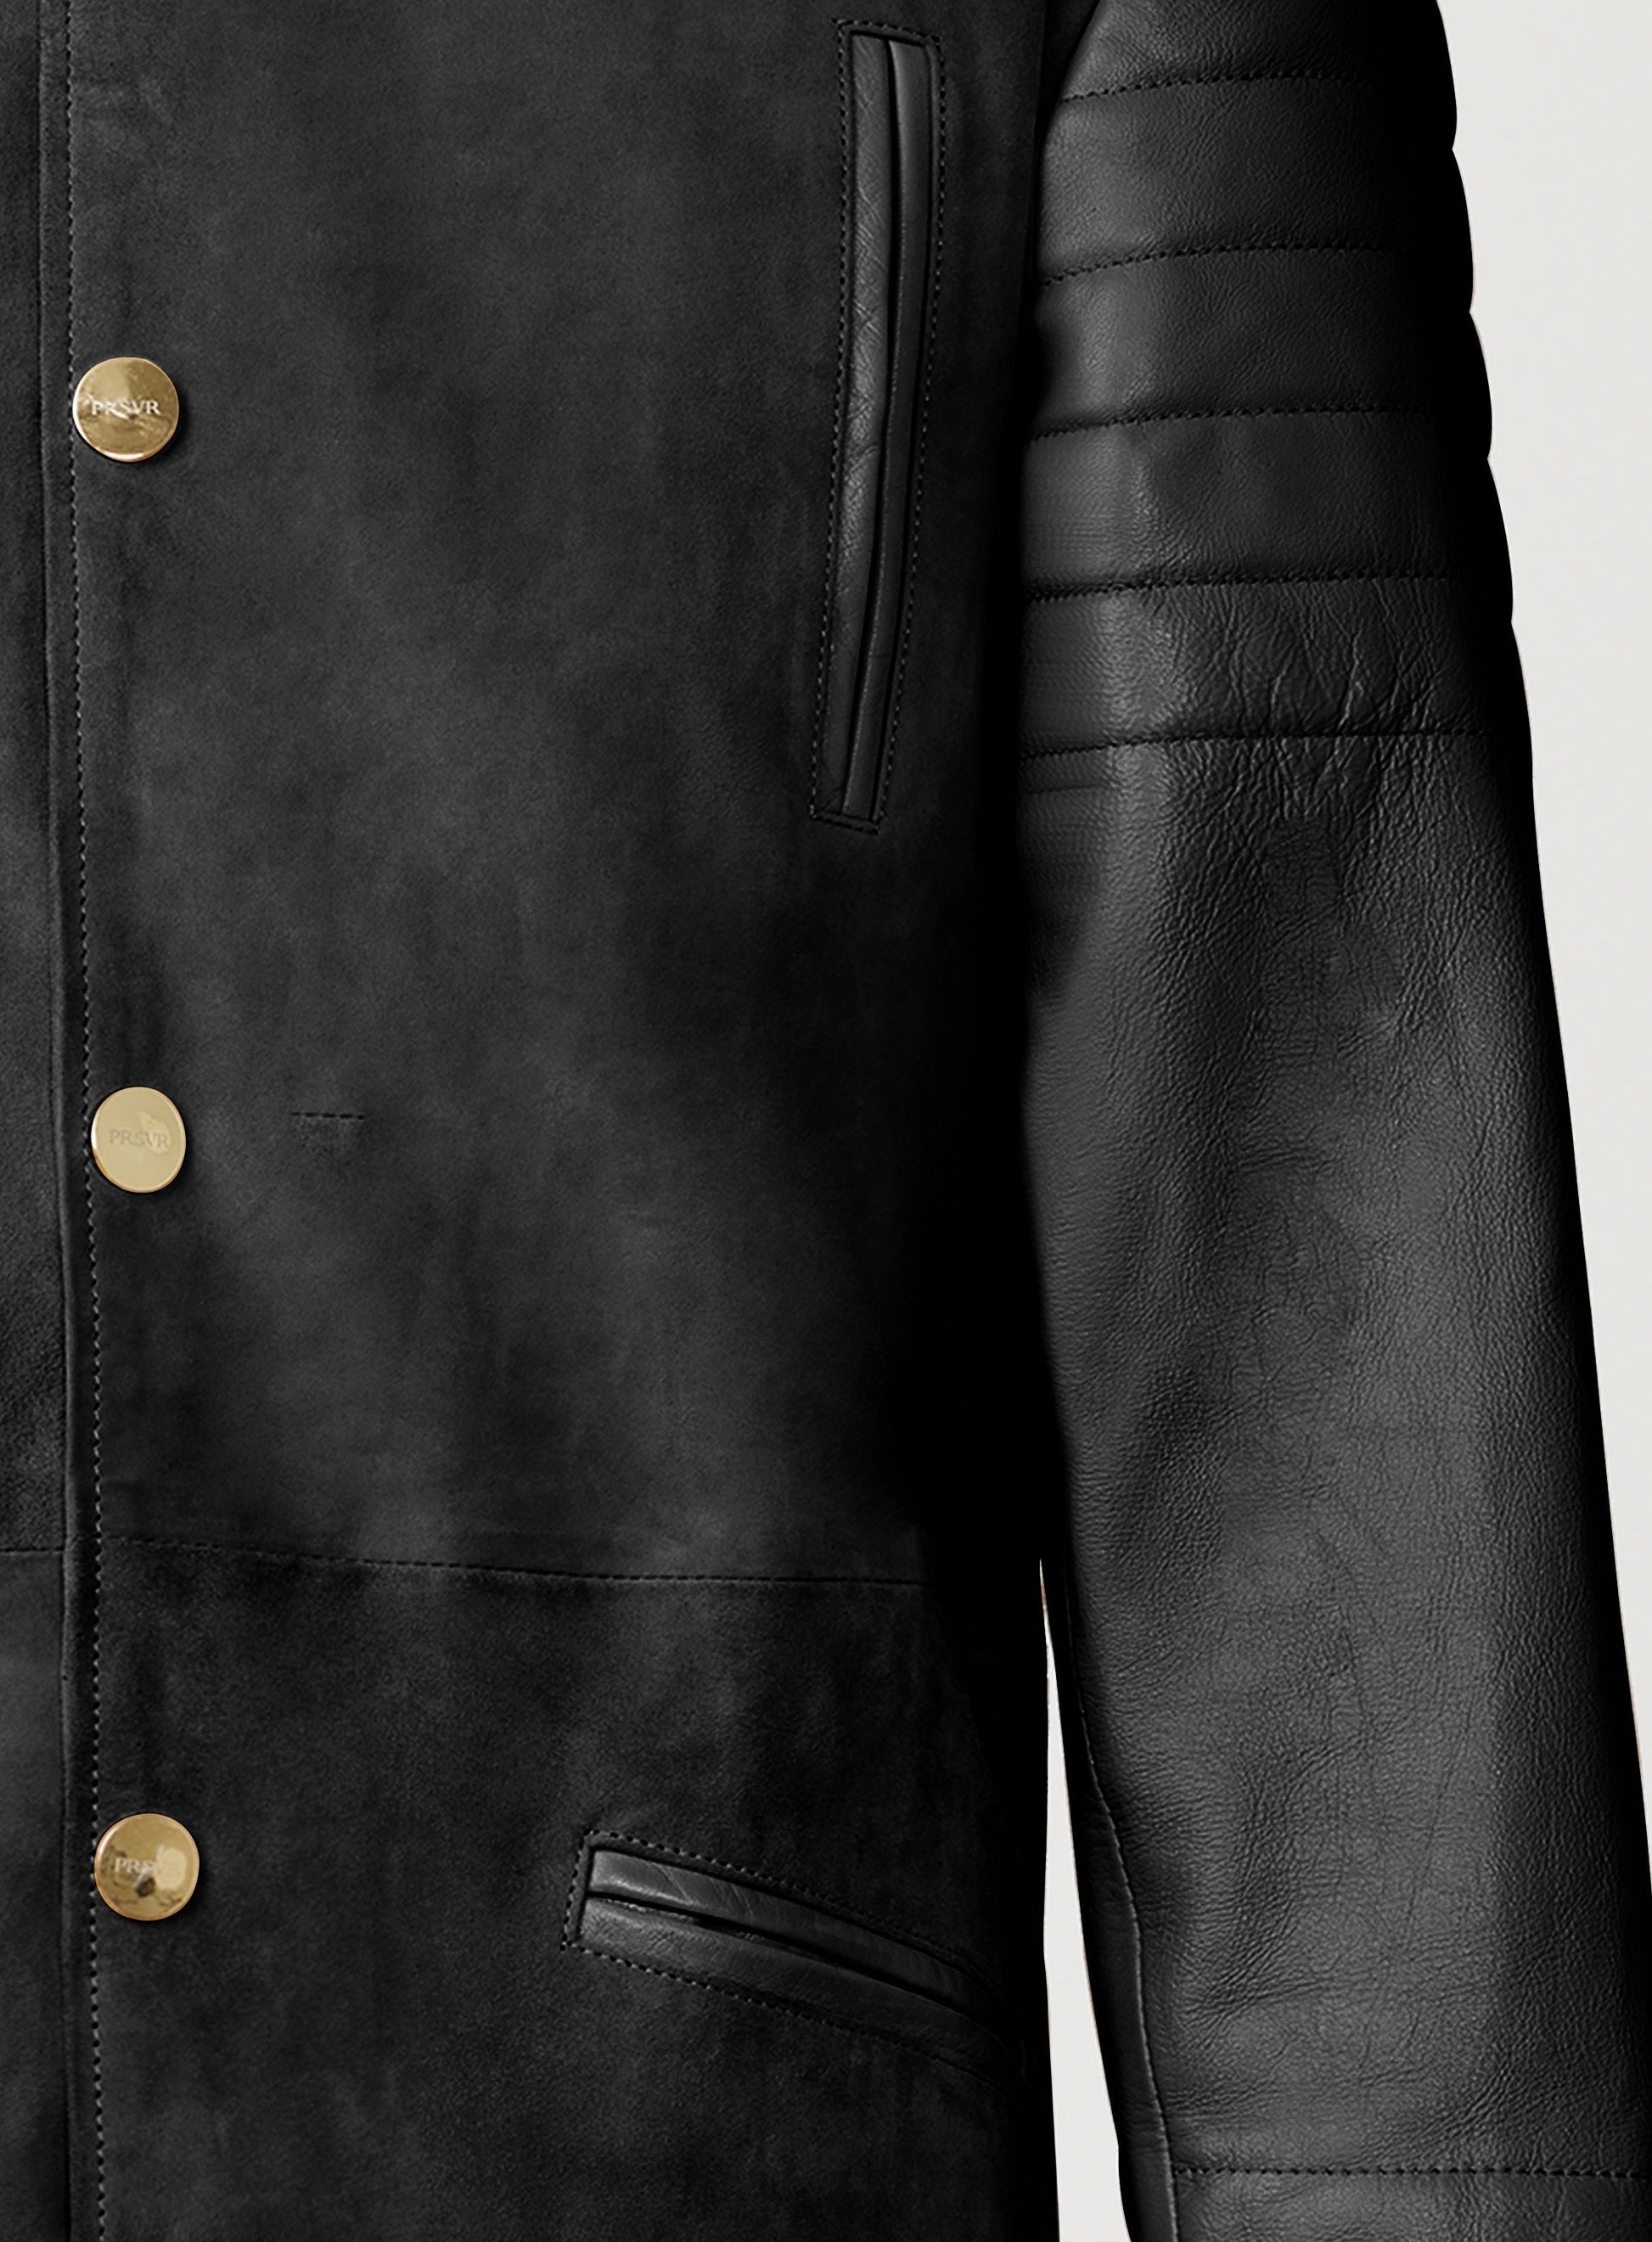 A Beautiful Black Suede Trench Coat, created by designer brand PRSVR. The PRSVR Lab Coat has a suede Body, and lambskin leather sleeves that show off a padded ribbed design on the shoulder and wrist of the sleeve. 